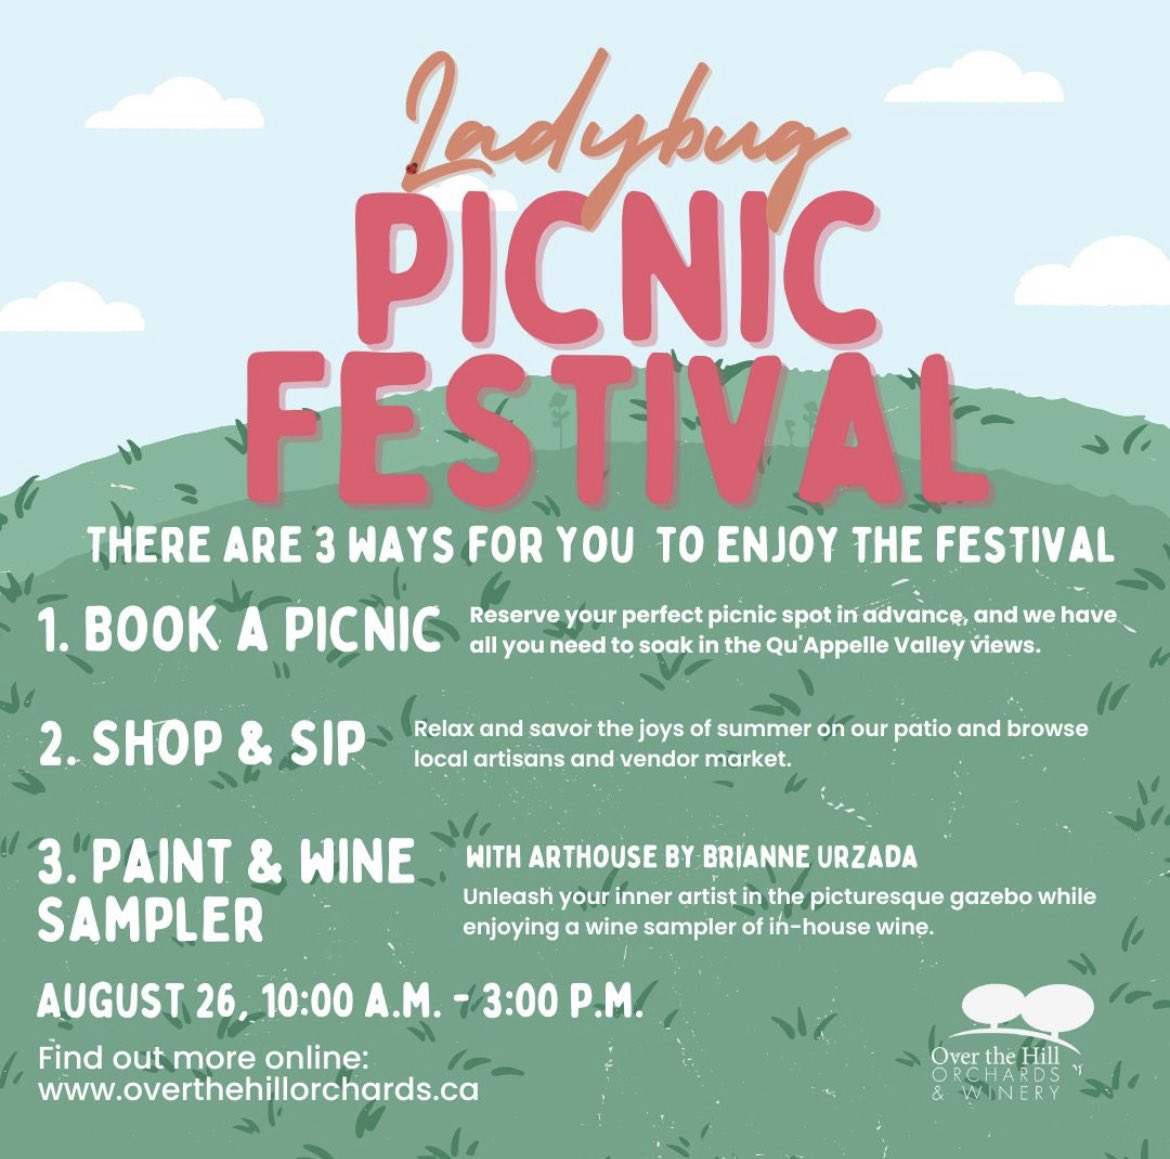 Come join us for our Ladybug Picnic Festival! Book your spot today! overthehillorchards.ca/ladybug-picnic…